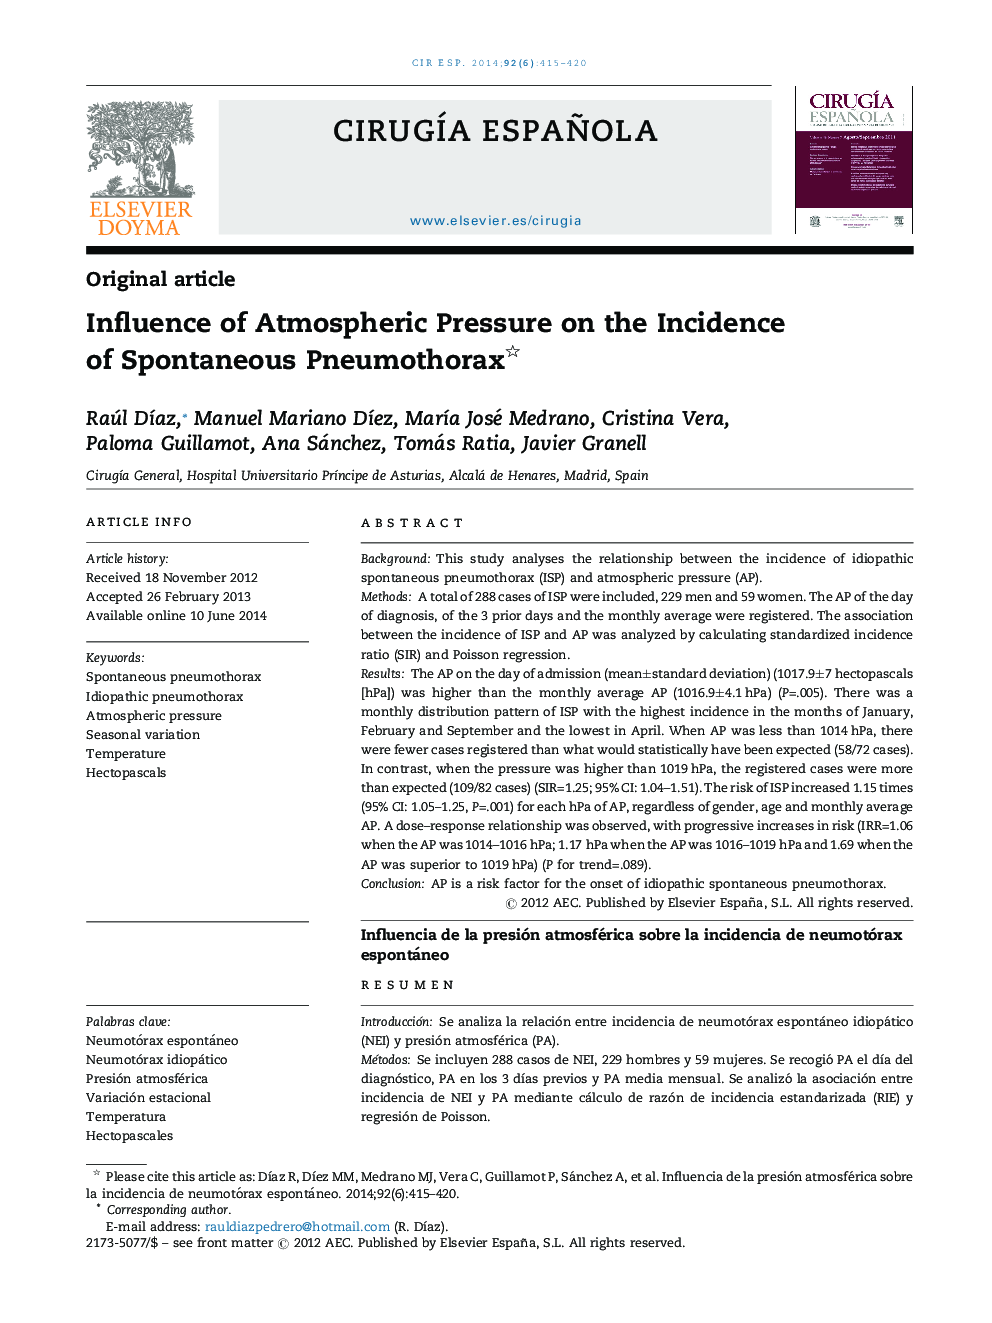 Influence of Atmospheric Pressure on the Incidence of Spontaneous Pneumothorax 